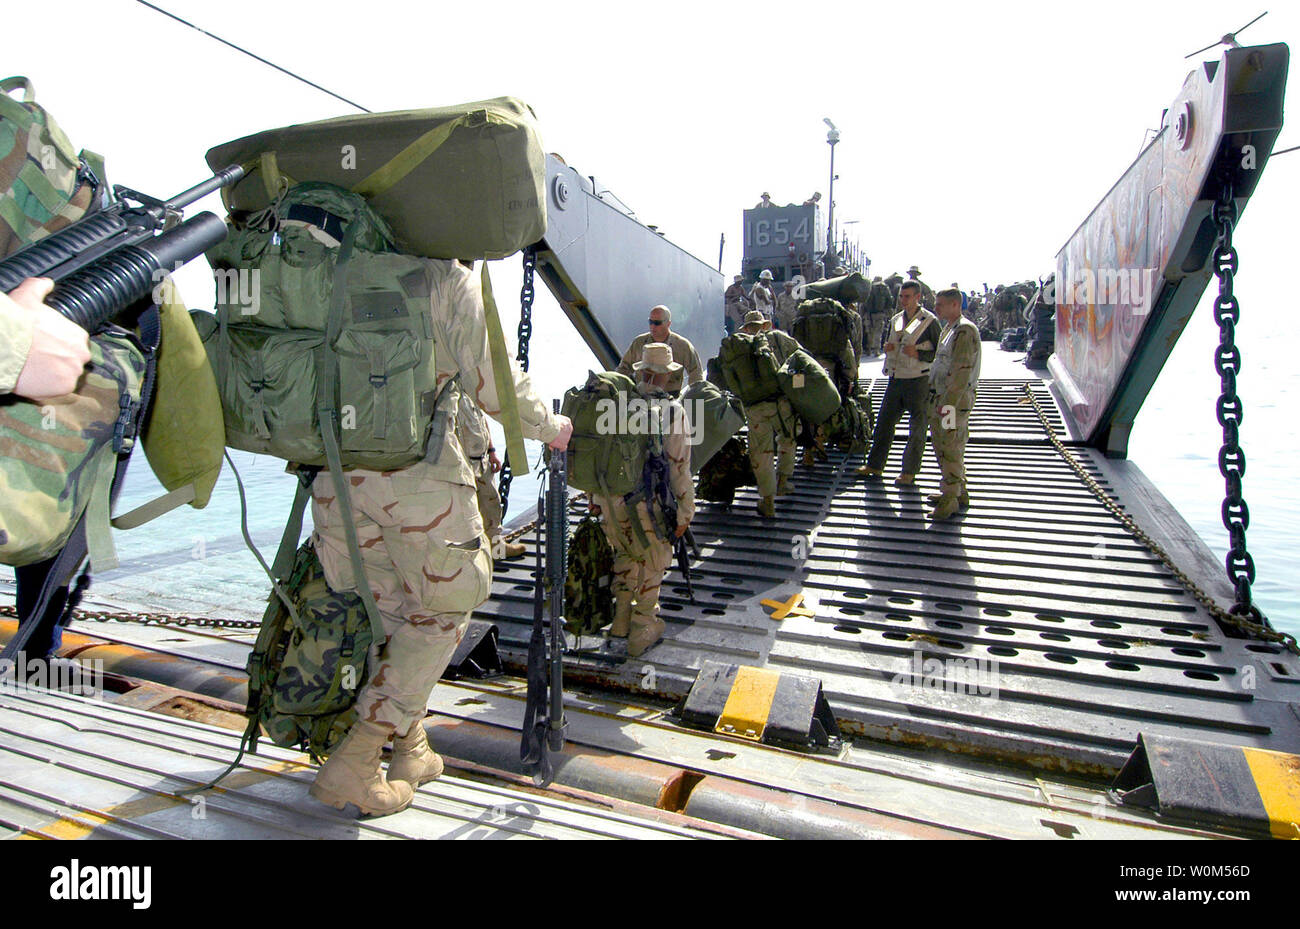 U.S. Marines assigned to 22nd Marine Expeditionary Unit (22nd MEU) Special Operations Capable (SOC) depart the amphibious assault ship USS Wasp (LHD 1) onto Landing Craft Utility 1654 (LCU 1654) in the arabian Gulf on March 28, 2004. The Landing Craft is assigned to the amphibious transport ship USS Shreveport (LPD 12). The Marines are off-loading in support of their mission in the 5th Fleet Area of Responsibility (AOR). Wasp, Shreveport and 22nd MEU (SOC) are currently on deployment as part of Expeditionary Strike Group Two (ESG 2).  (UPI Photo/Keith Simmons/U.S. Navy) Stock Photo